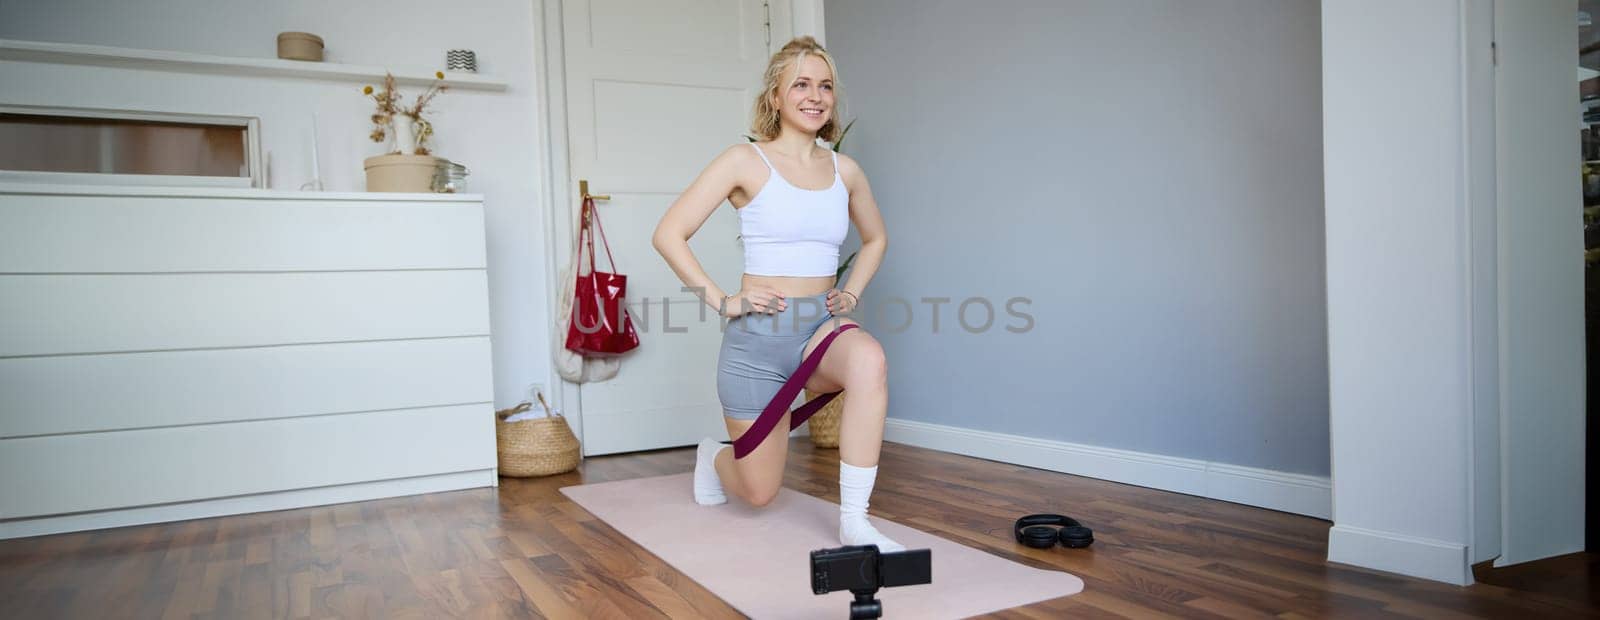 Portrait of fitness instructor, young sporty vlogger woman doing exercises on camera, shooting video about workout, using resistance band and doing sit-ups at home in empty room.